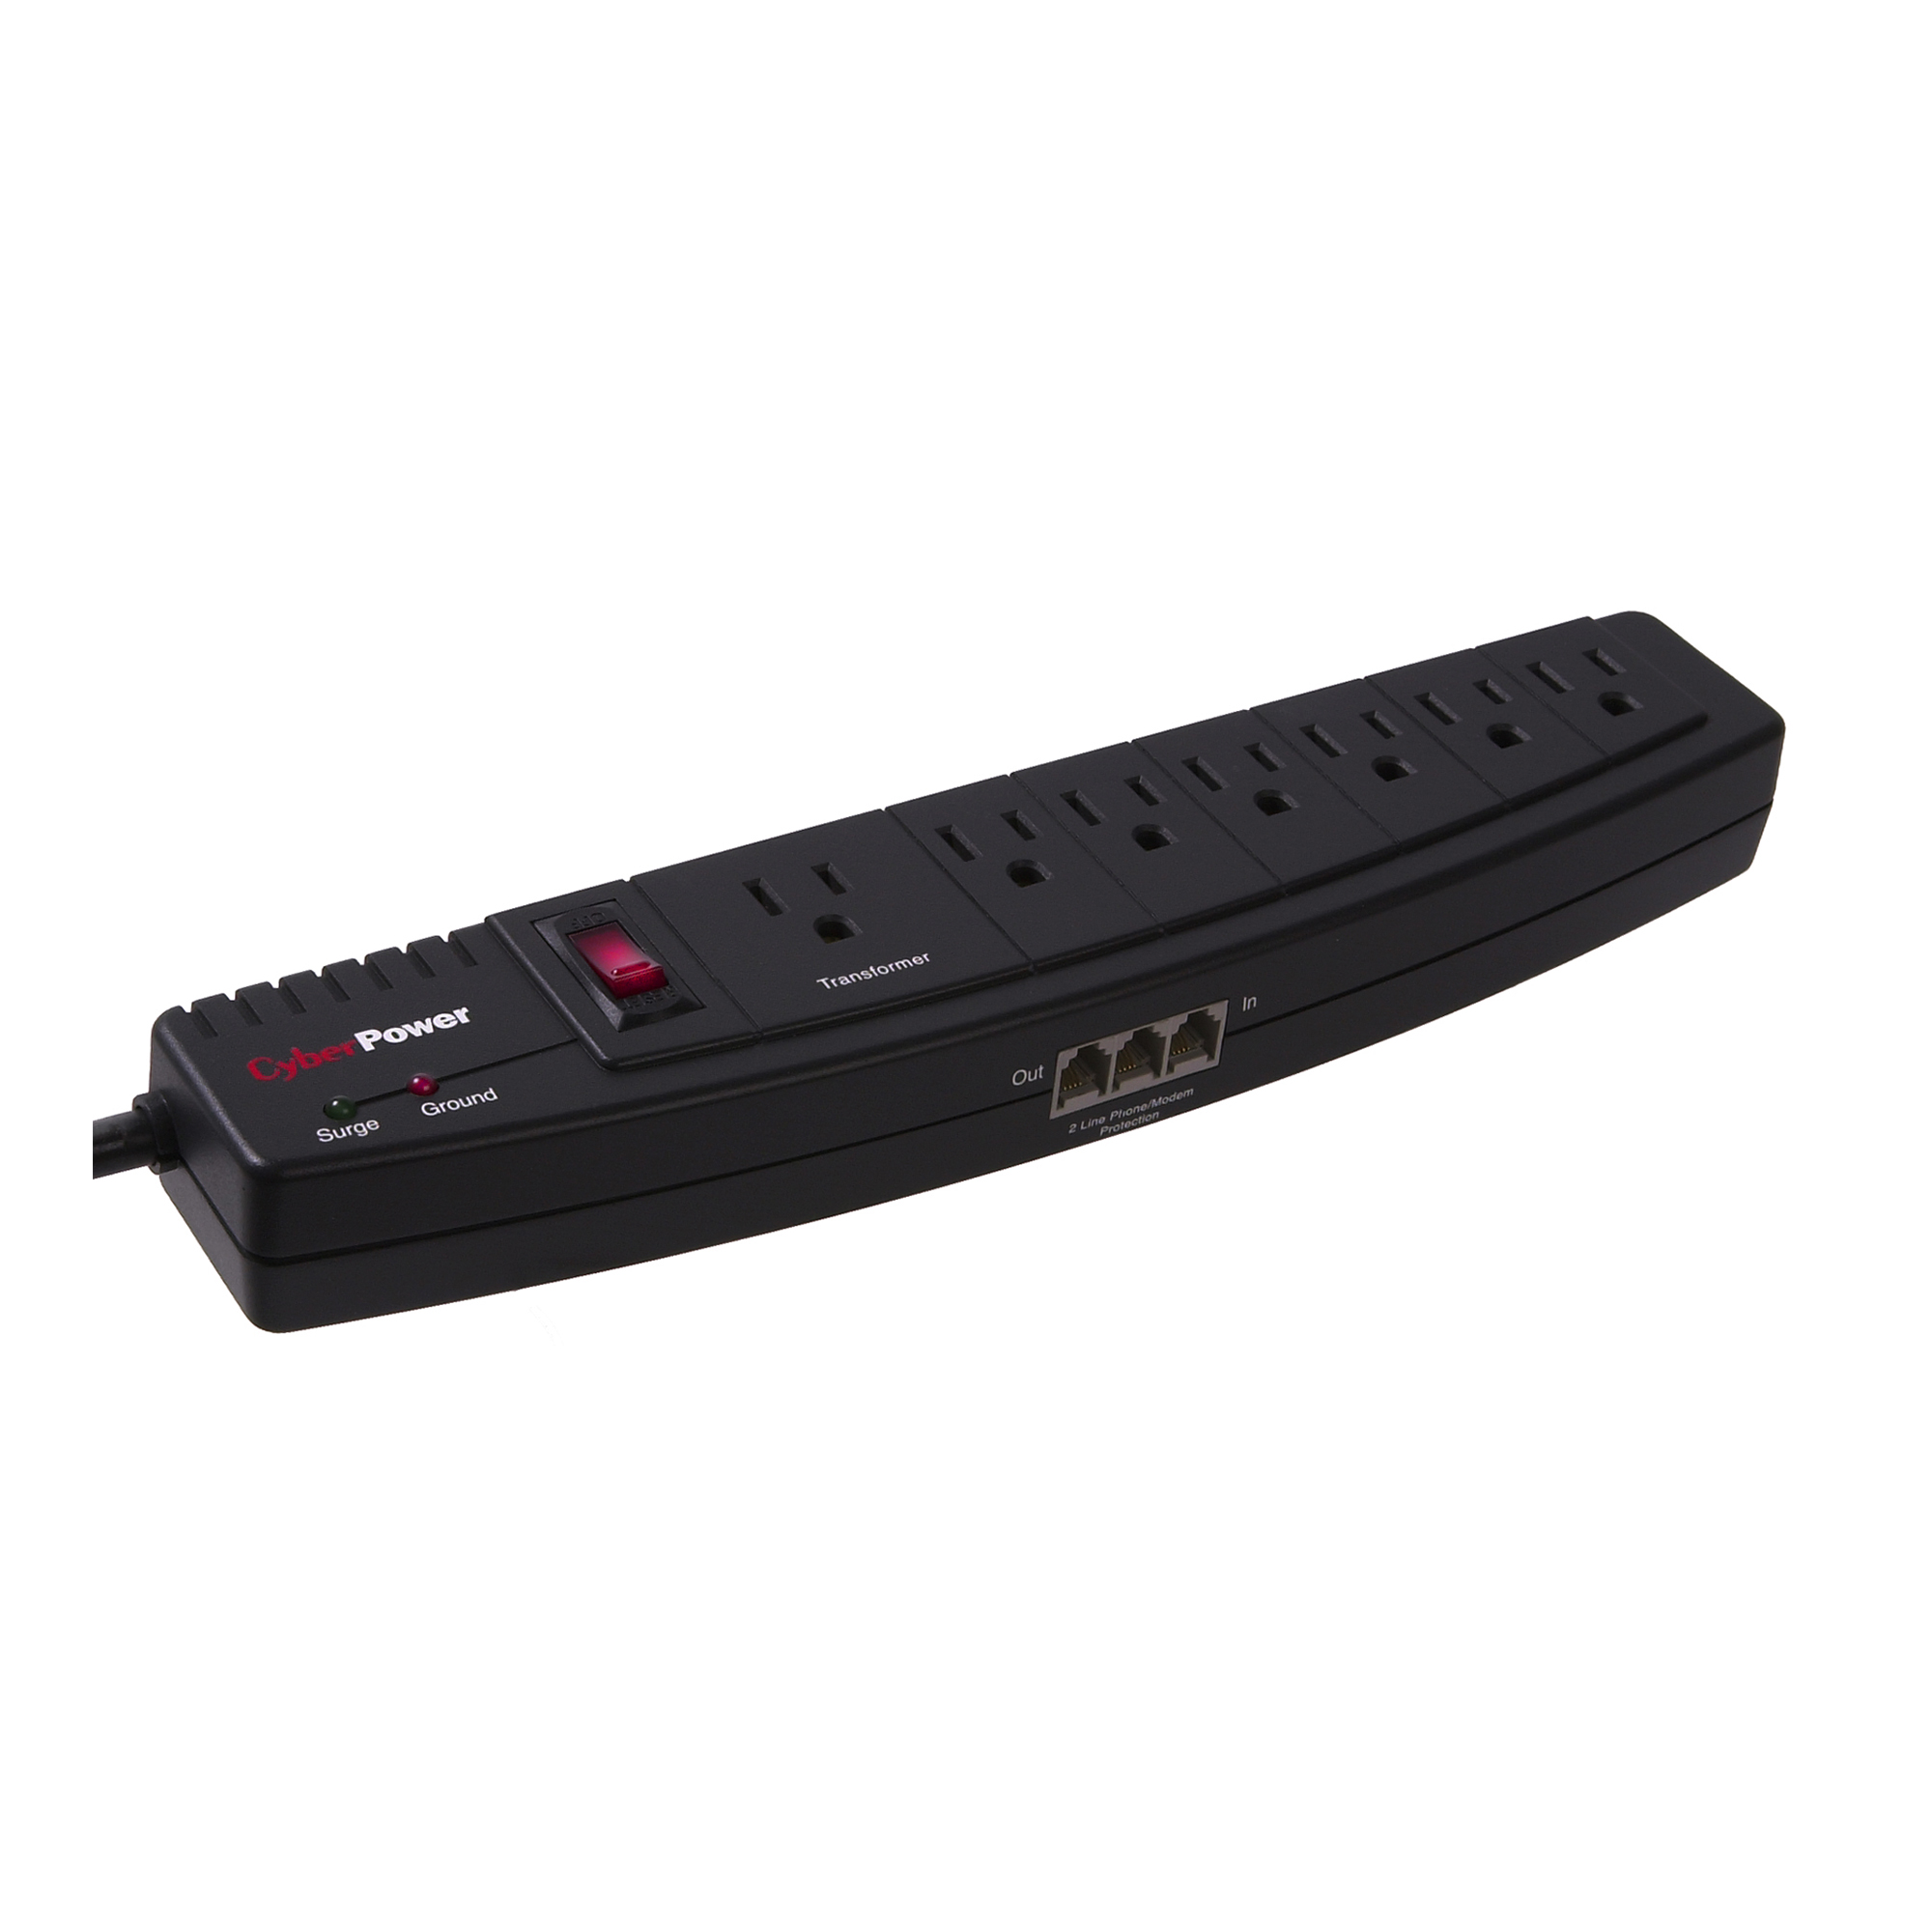 CyberPower CyberPower Power Saving Surge Protector Model PD750G 